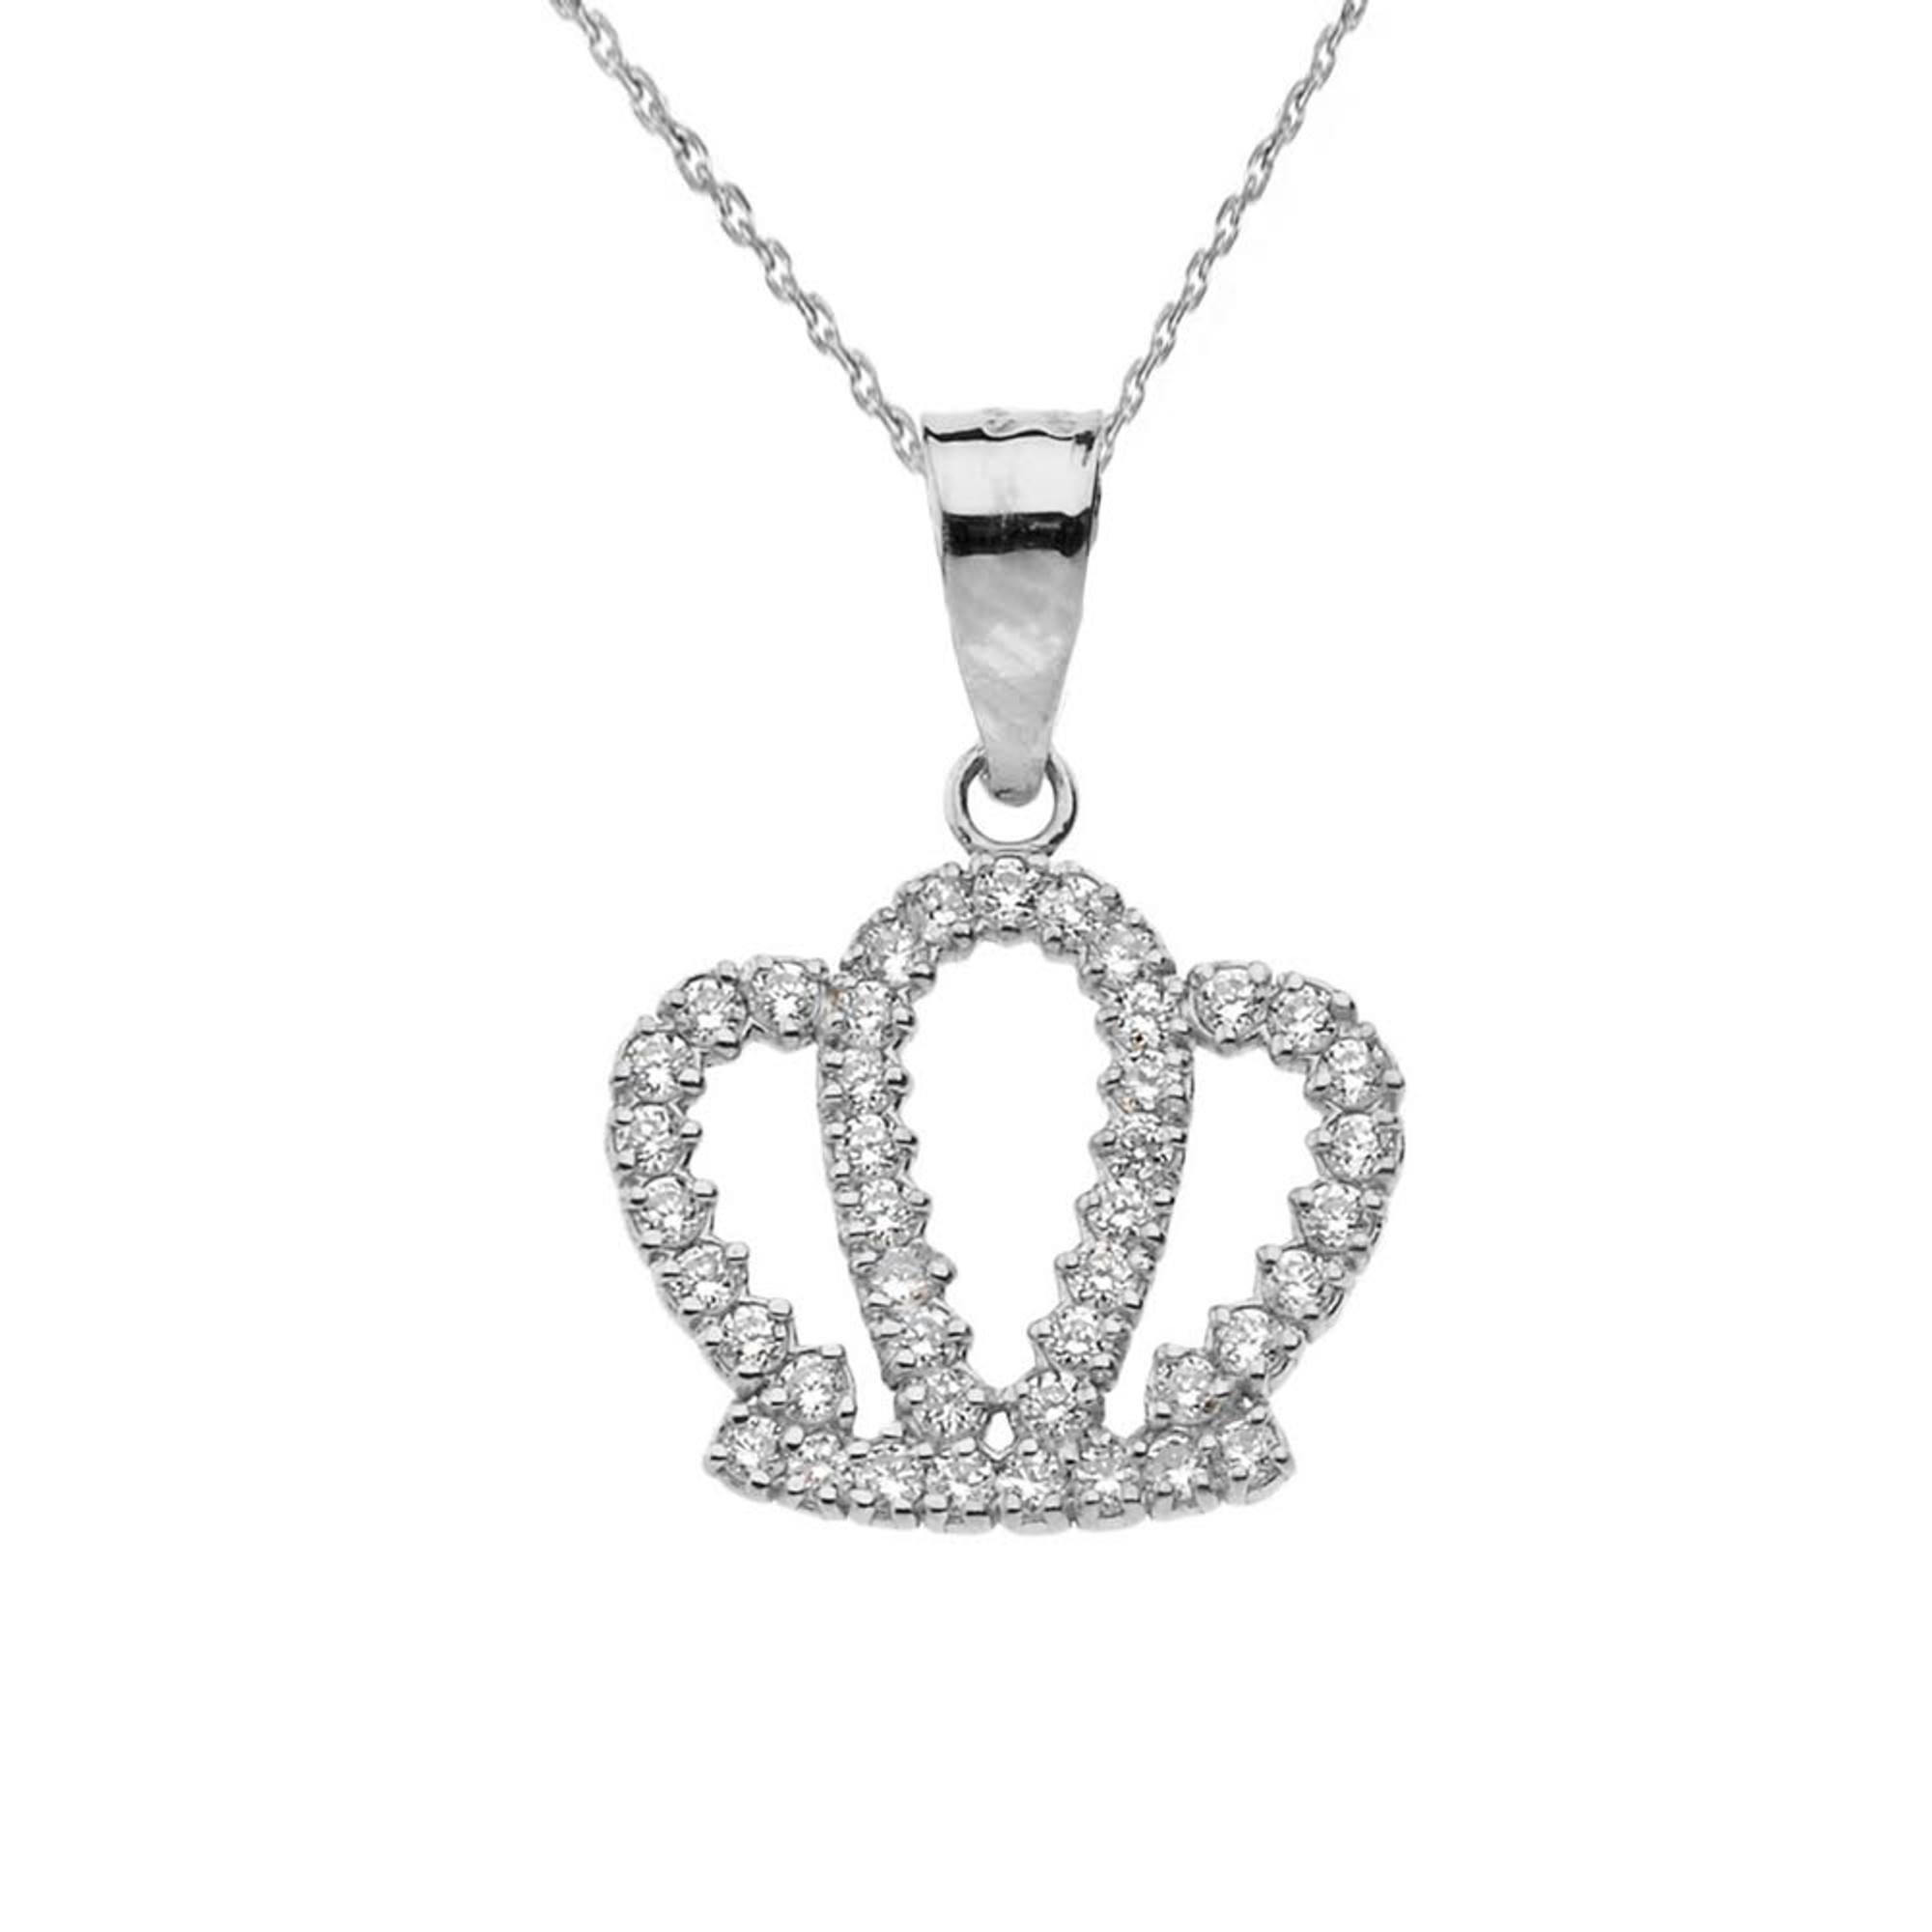 Solid White Gold Radiant Diamond Royal Crown Pendant Necklace